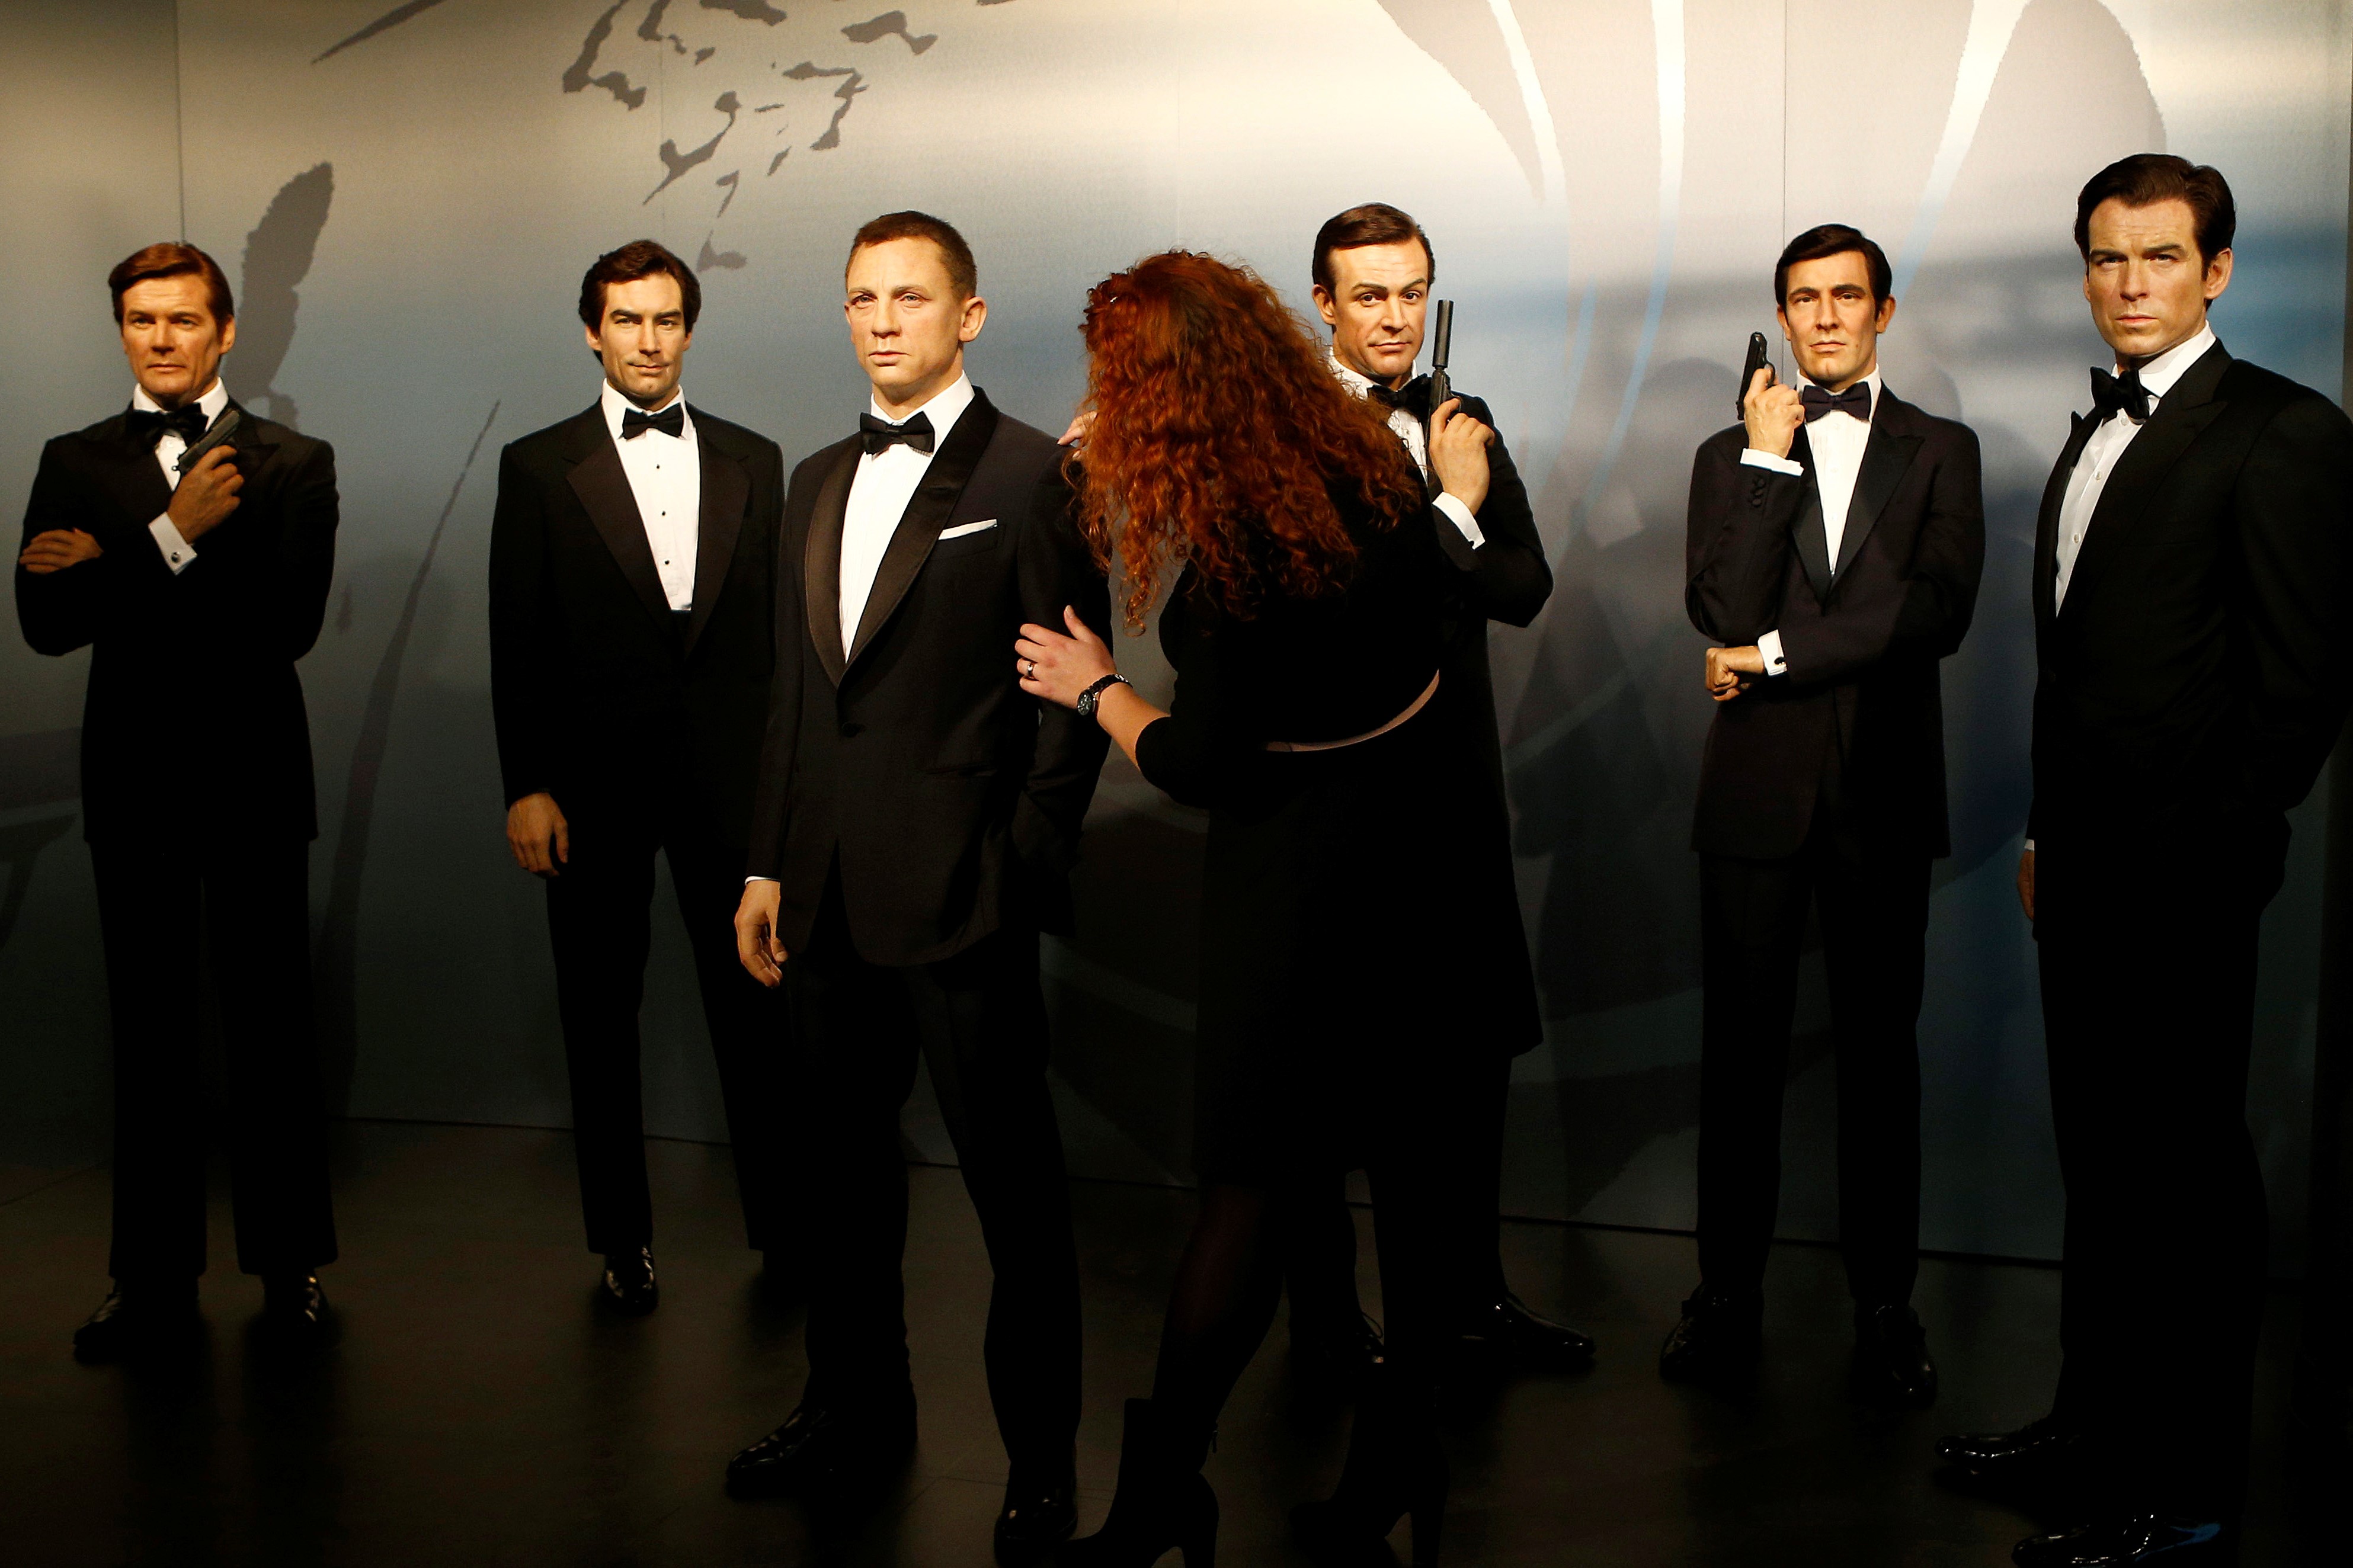 Wax figures of all 6 actors who portrayed James Bond character (Reuters)